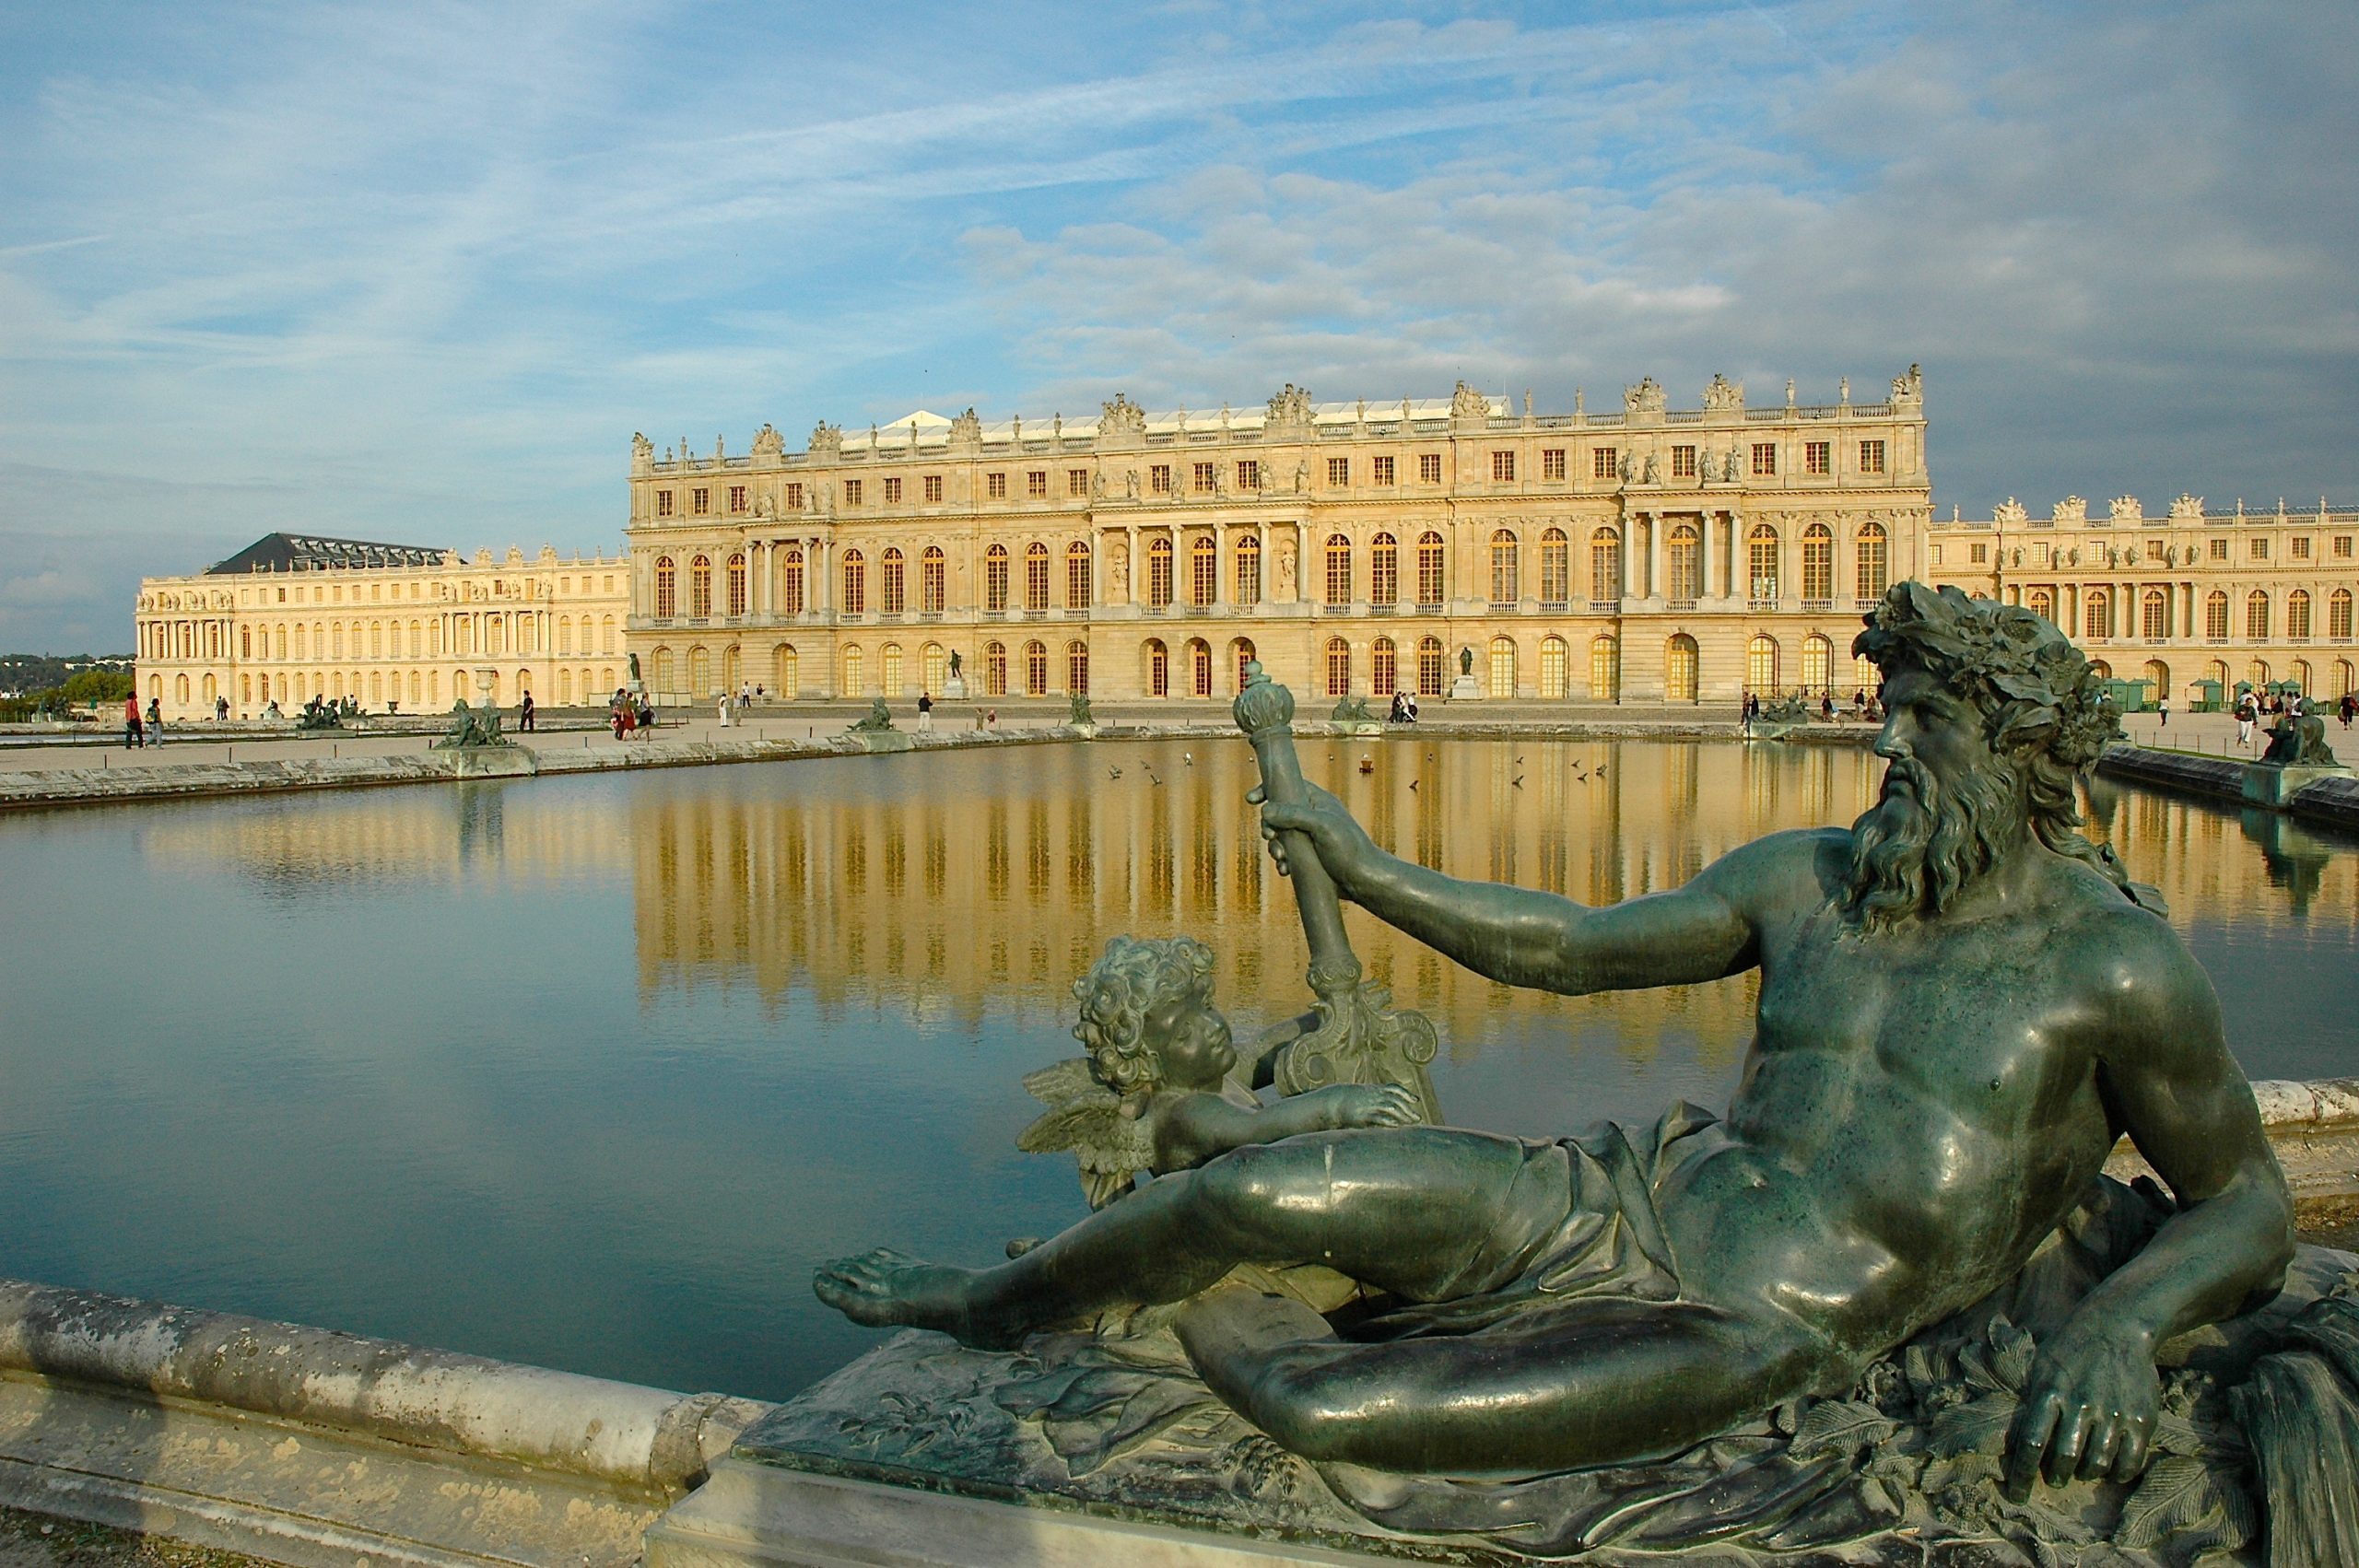 A view of the palace of Versaille in France. In the foreground is a statue of a God layout down